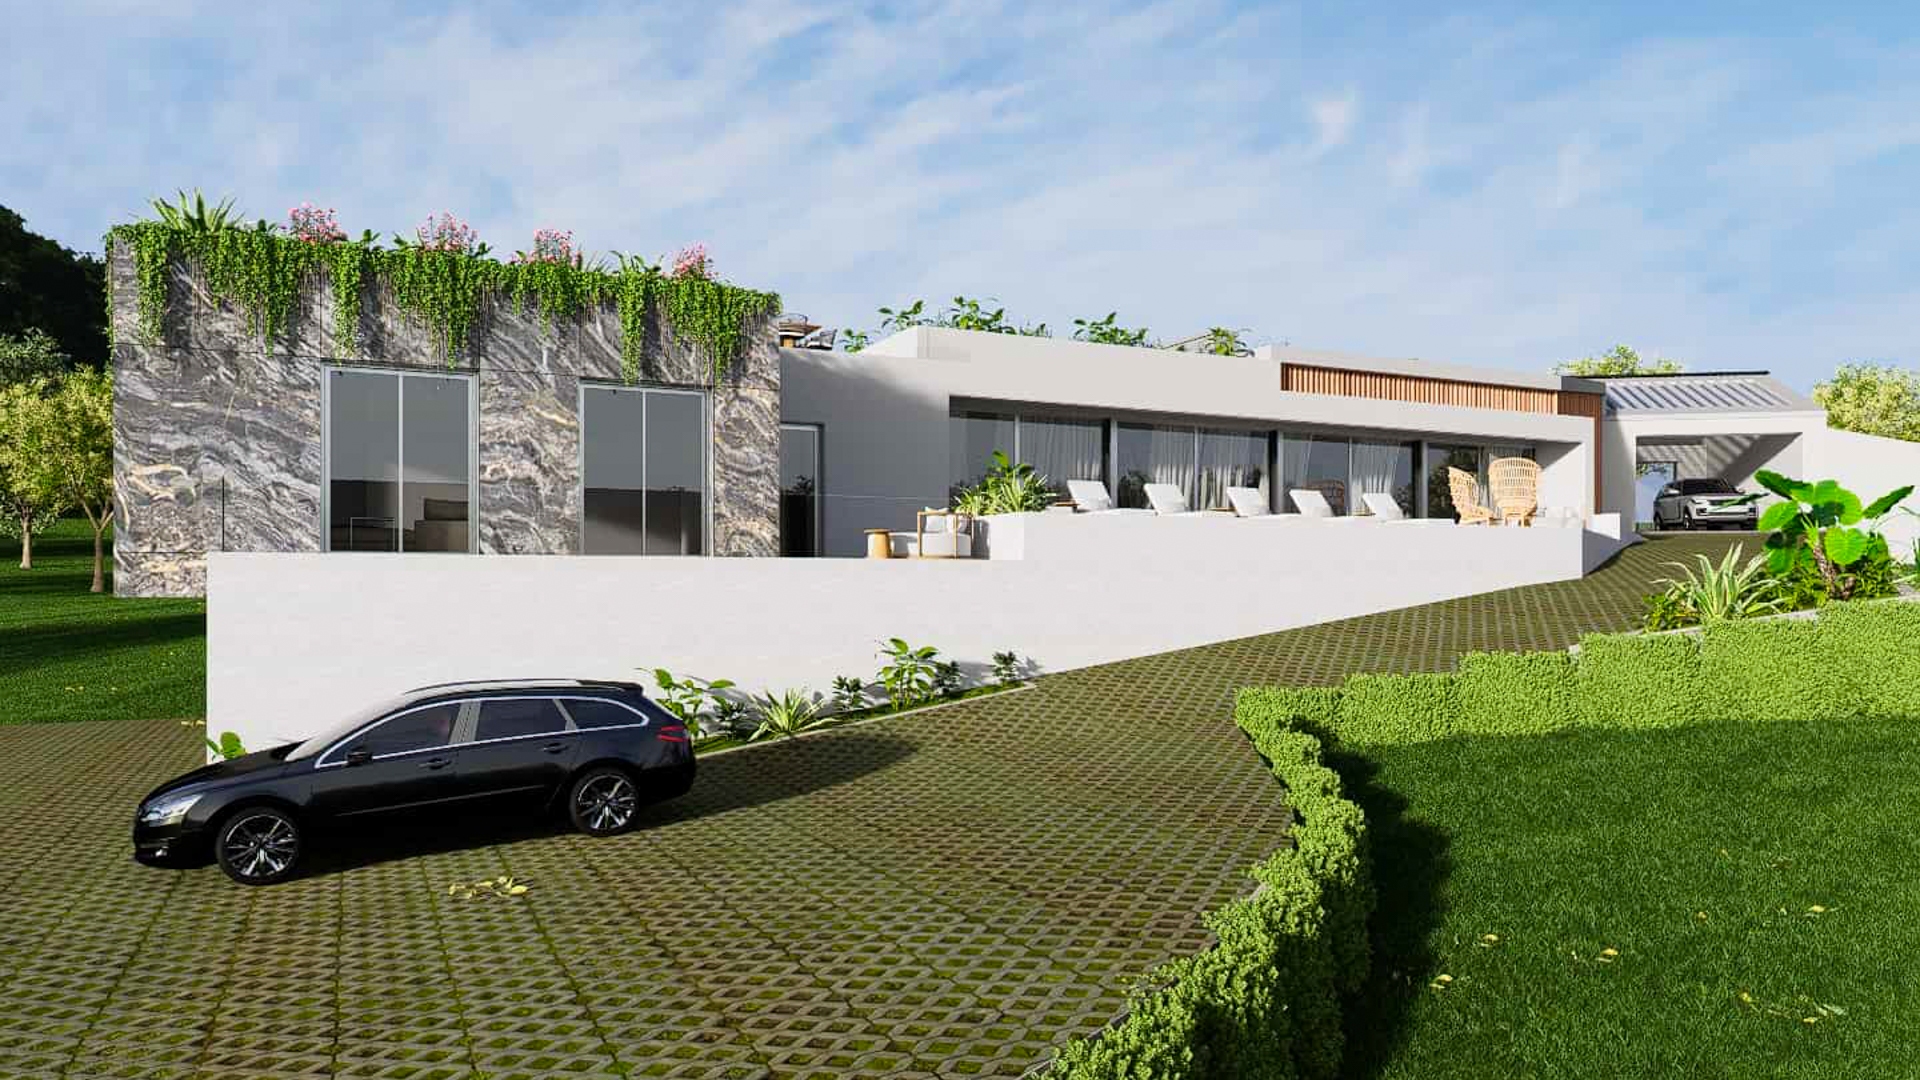 Plot with Approved Project for 4 Bedroom Contemporary Villa with Sea Views in Loulé | VM2173 Investment: good sized plot in elevated area with panoramic and sea views close to amenities such as shopping and golf. Approved project for a contemporary sea view villa with basement and infinity pool, in Loulé.